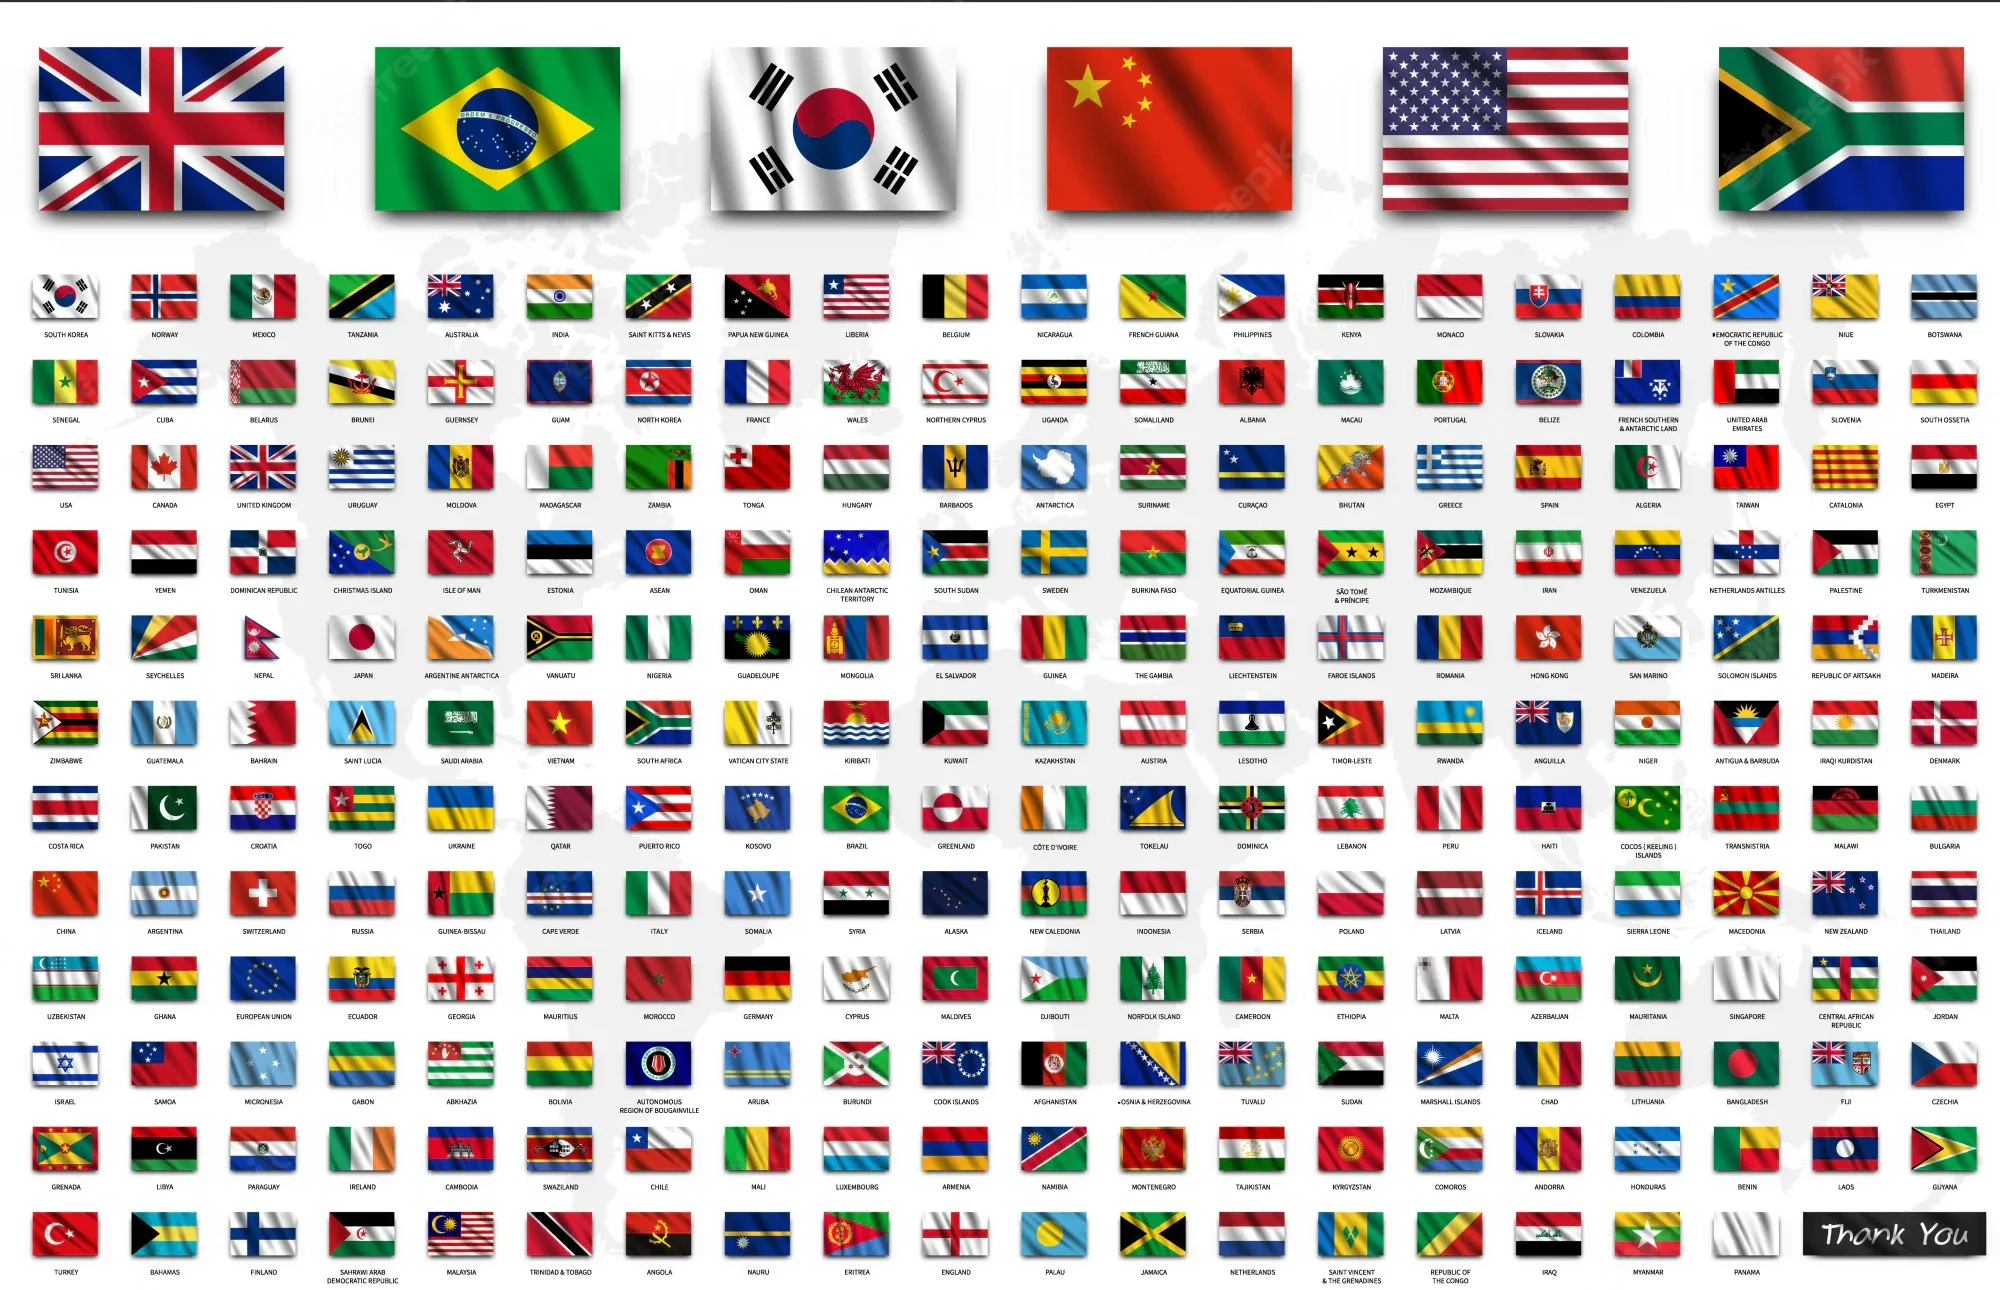 Every National Flag's Colors